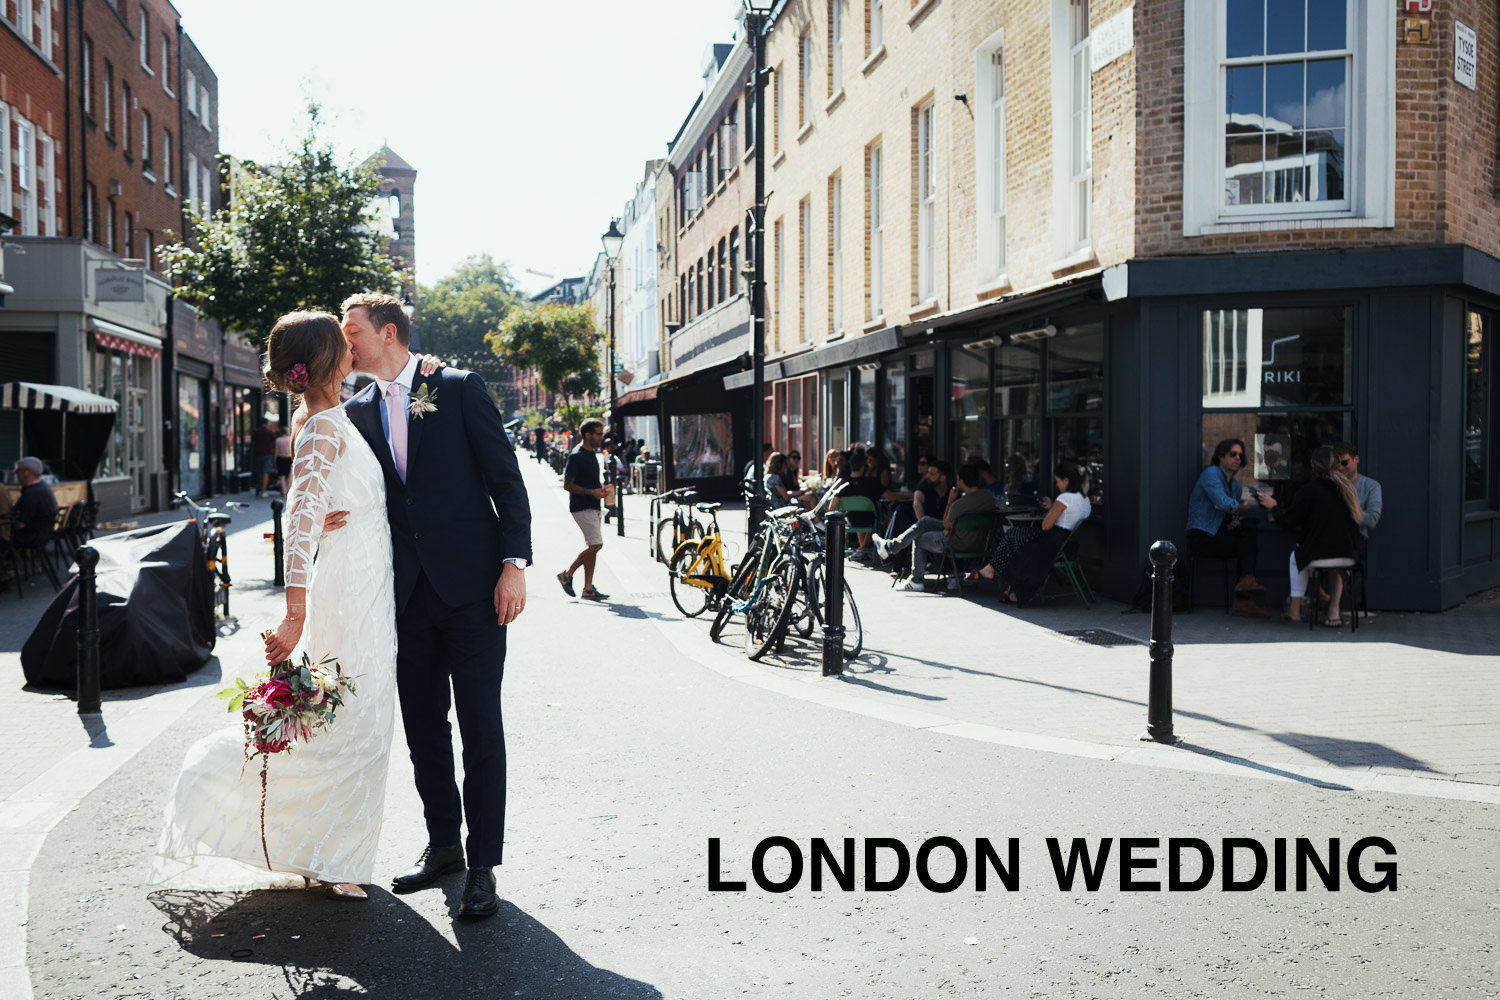 Newly married couple near Exmouth Market on the corning of Tysoe Street on their wedding day. Outside the Briki cafe.The bride is wearing the Willow Halfpenny dress.